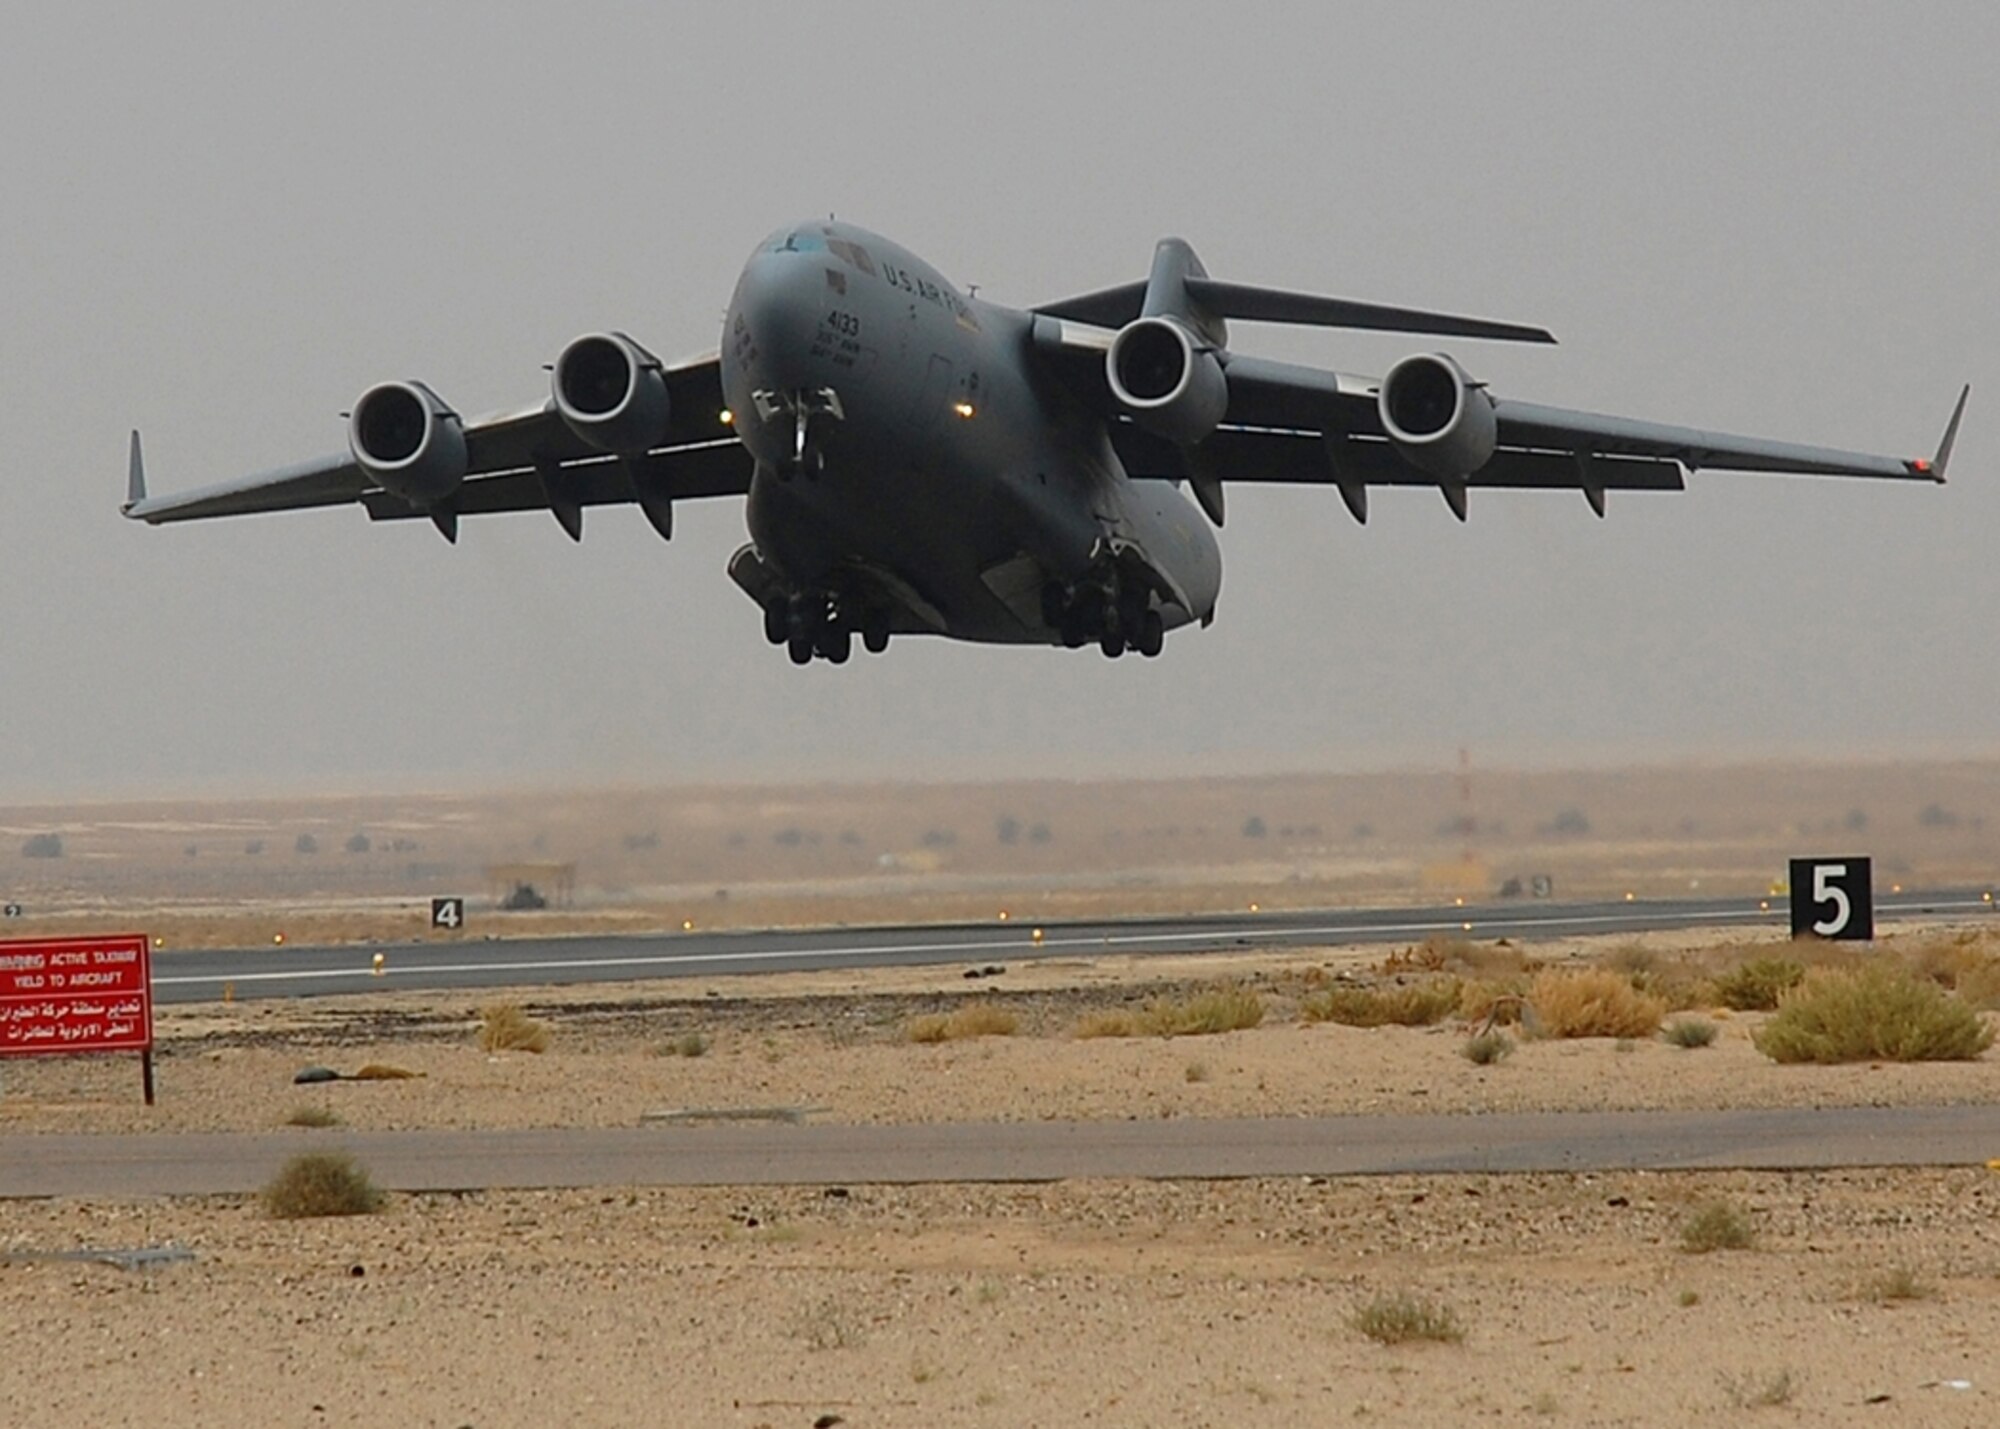 SOUTHWEST ASIA – An Air Force C-17 Globemaster III from McGuire AFB, N.J., takes off from an air base in Southwest Asia.  The C-17's primary mission in the AOR is to transport service members and cargo throughout the Middle East in support of Operations Enduring and Iraqi Freedom.  (U.S Air Force photo by Staff Sgt. Tia Schroeder)